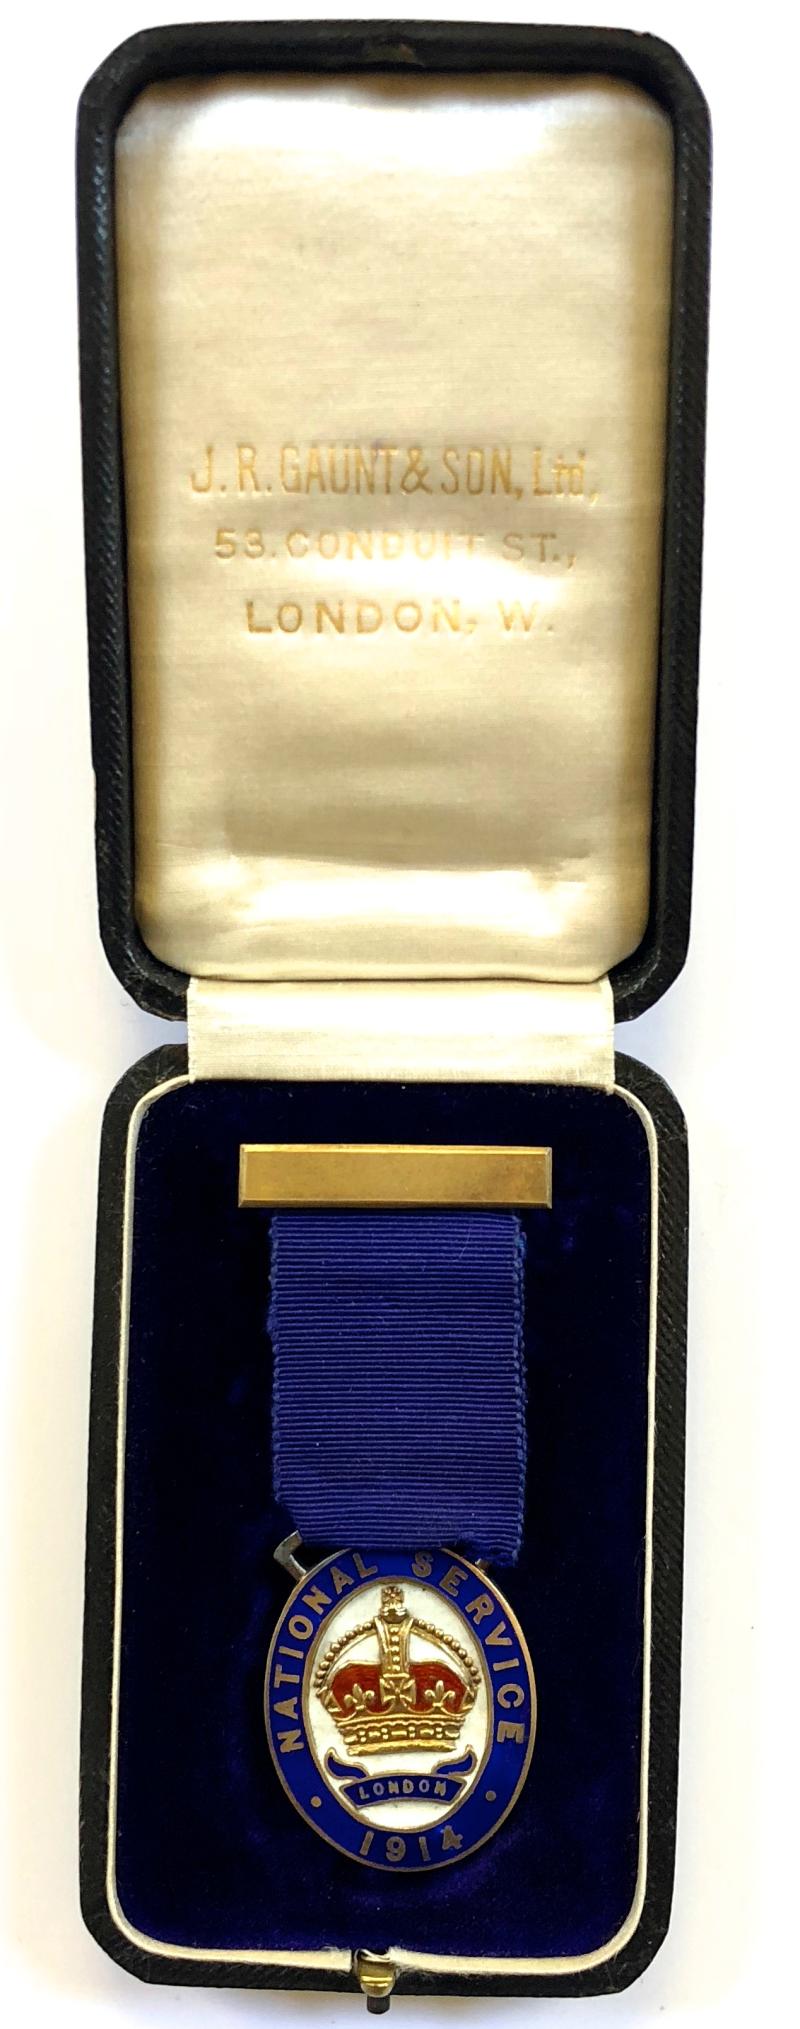 1914 National Service League London hallmarked silver service medal and case